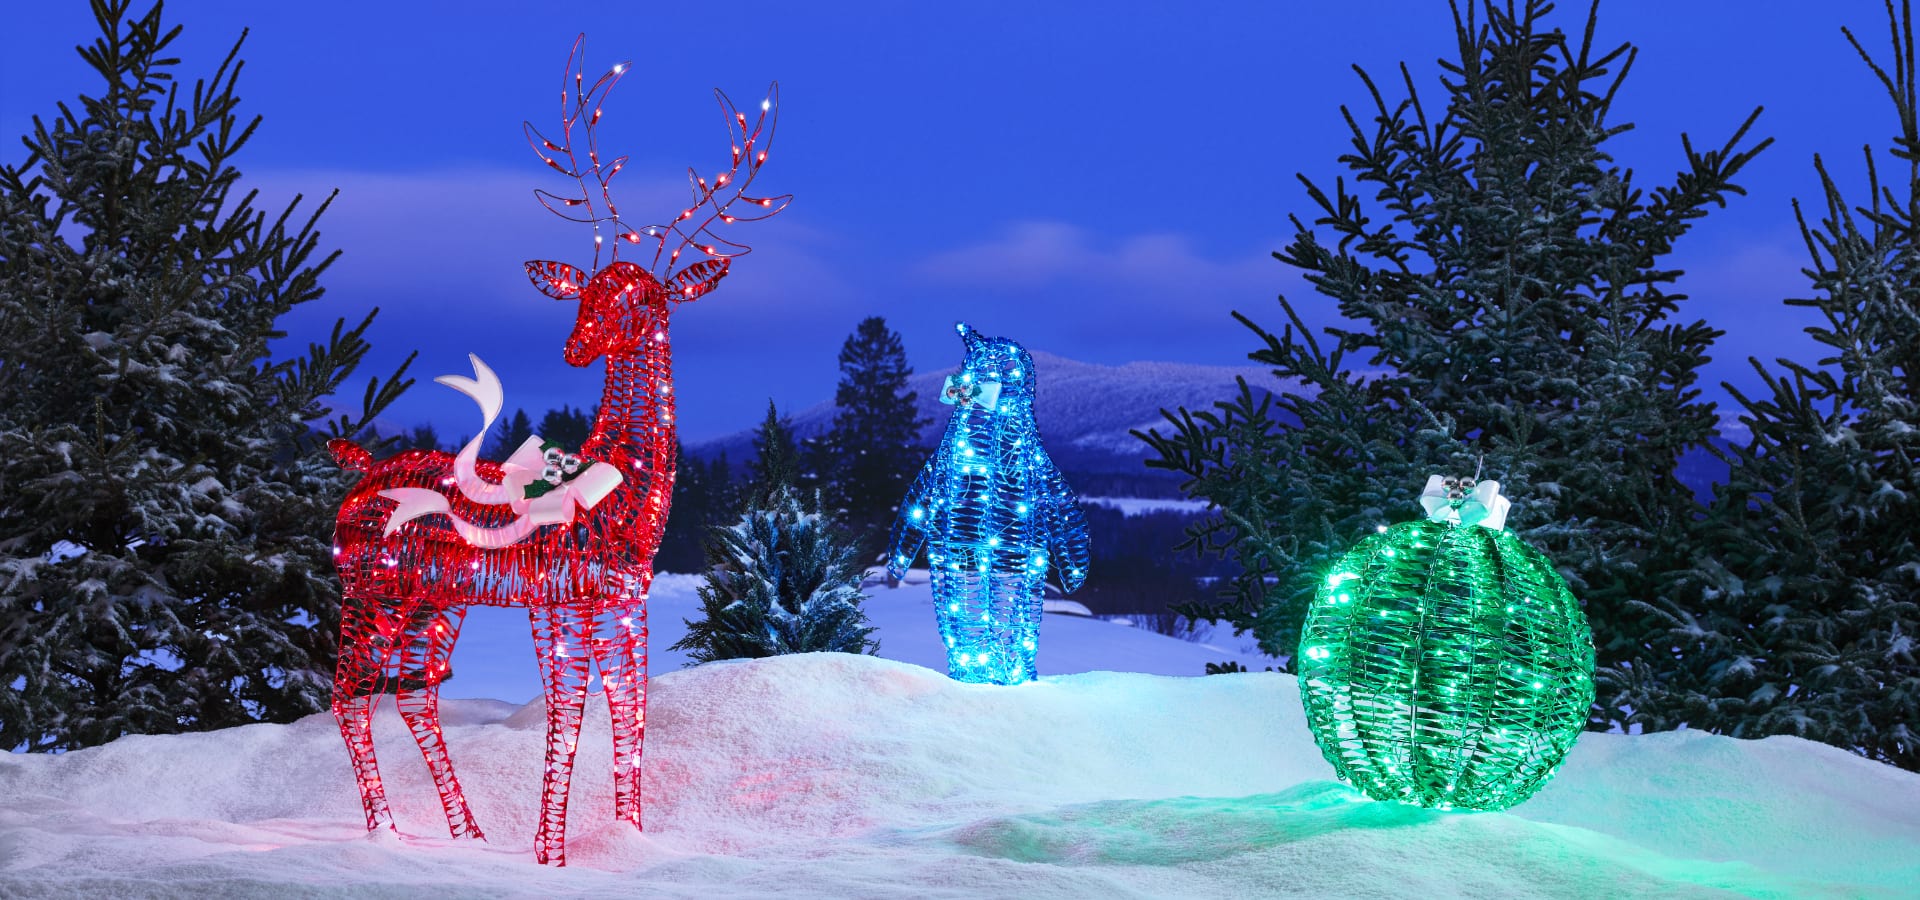 An assortment of pre-lit wireform figures on a snowy lawn including a reindeer, bear and ornament